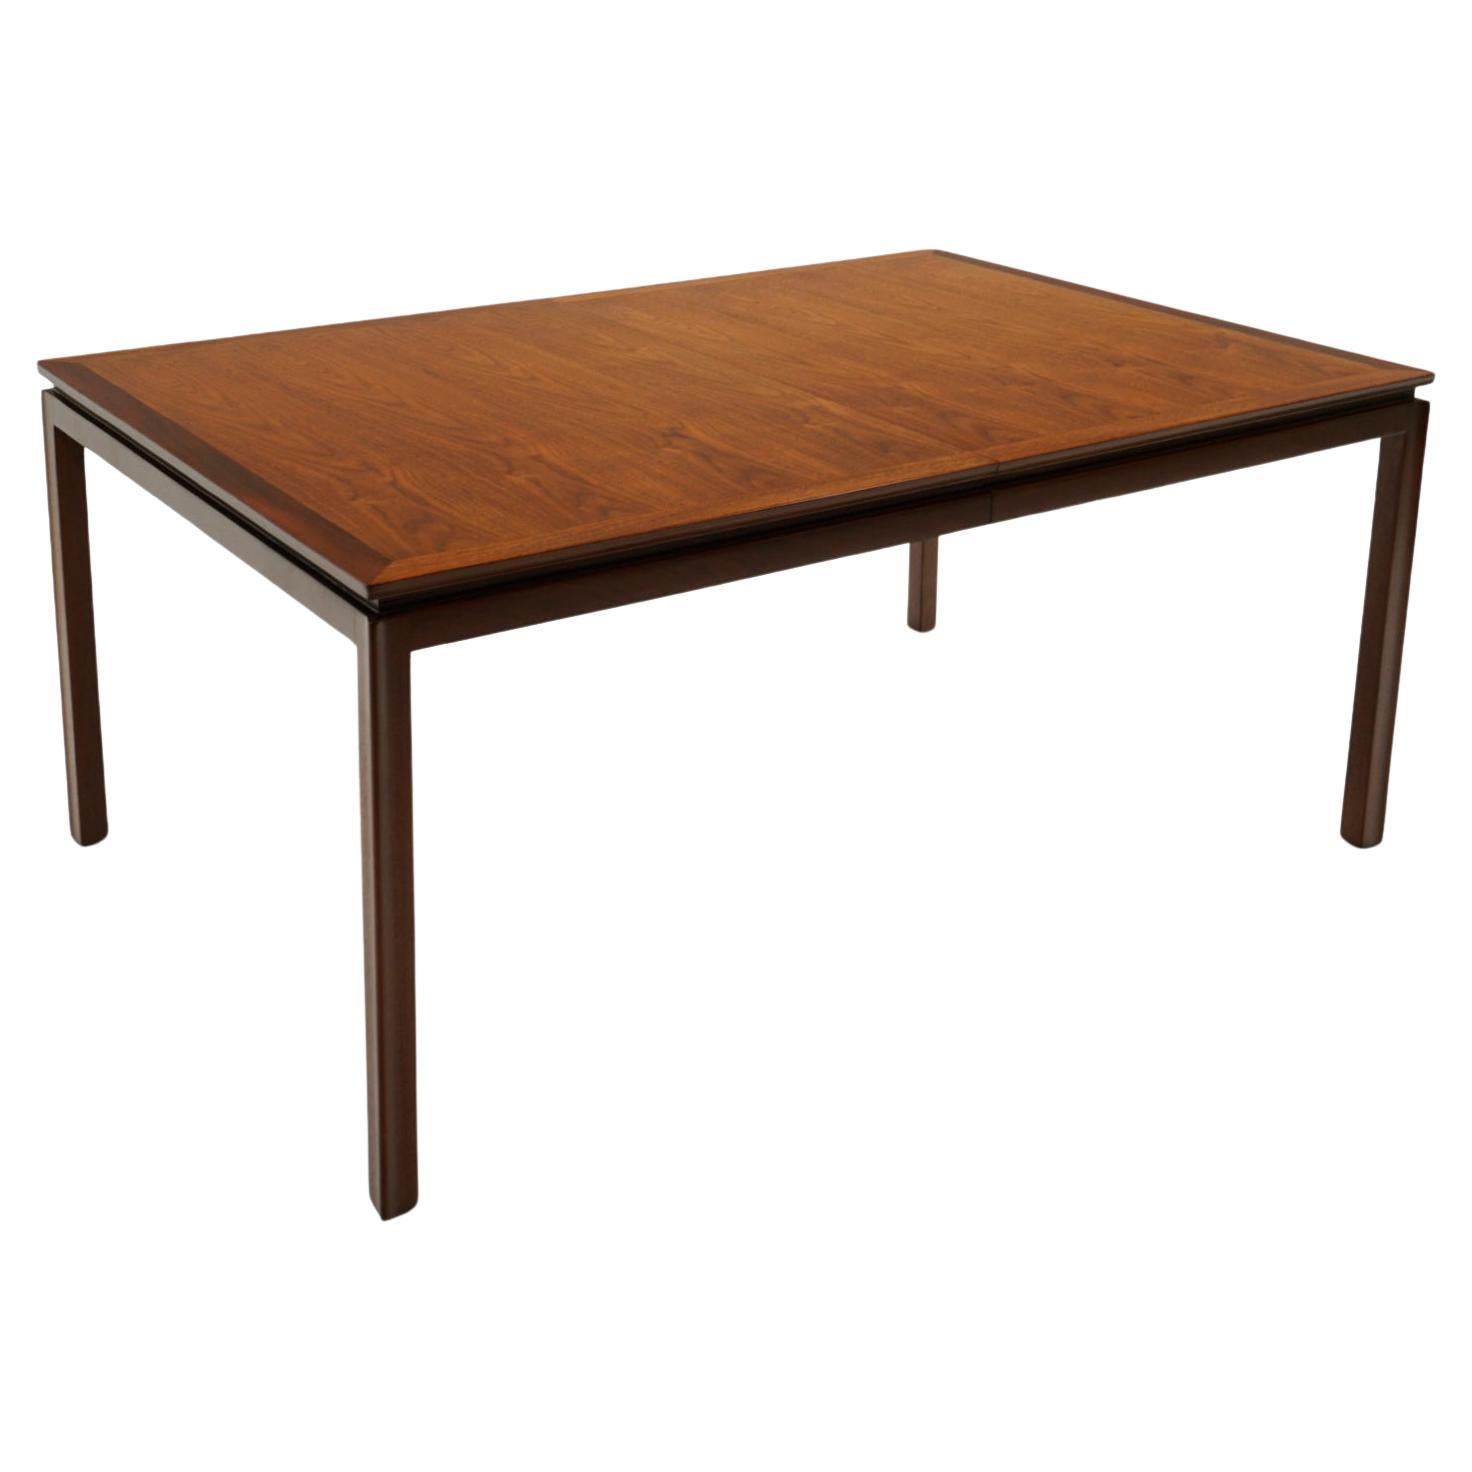 Expandable Dining Table in Mahogany by Edward Wormley. Expertly Refinished